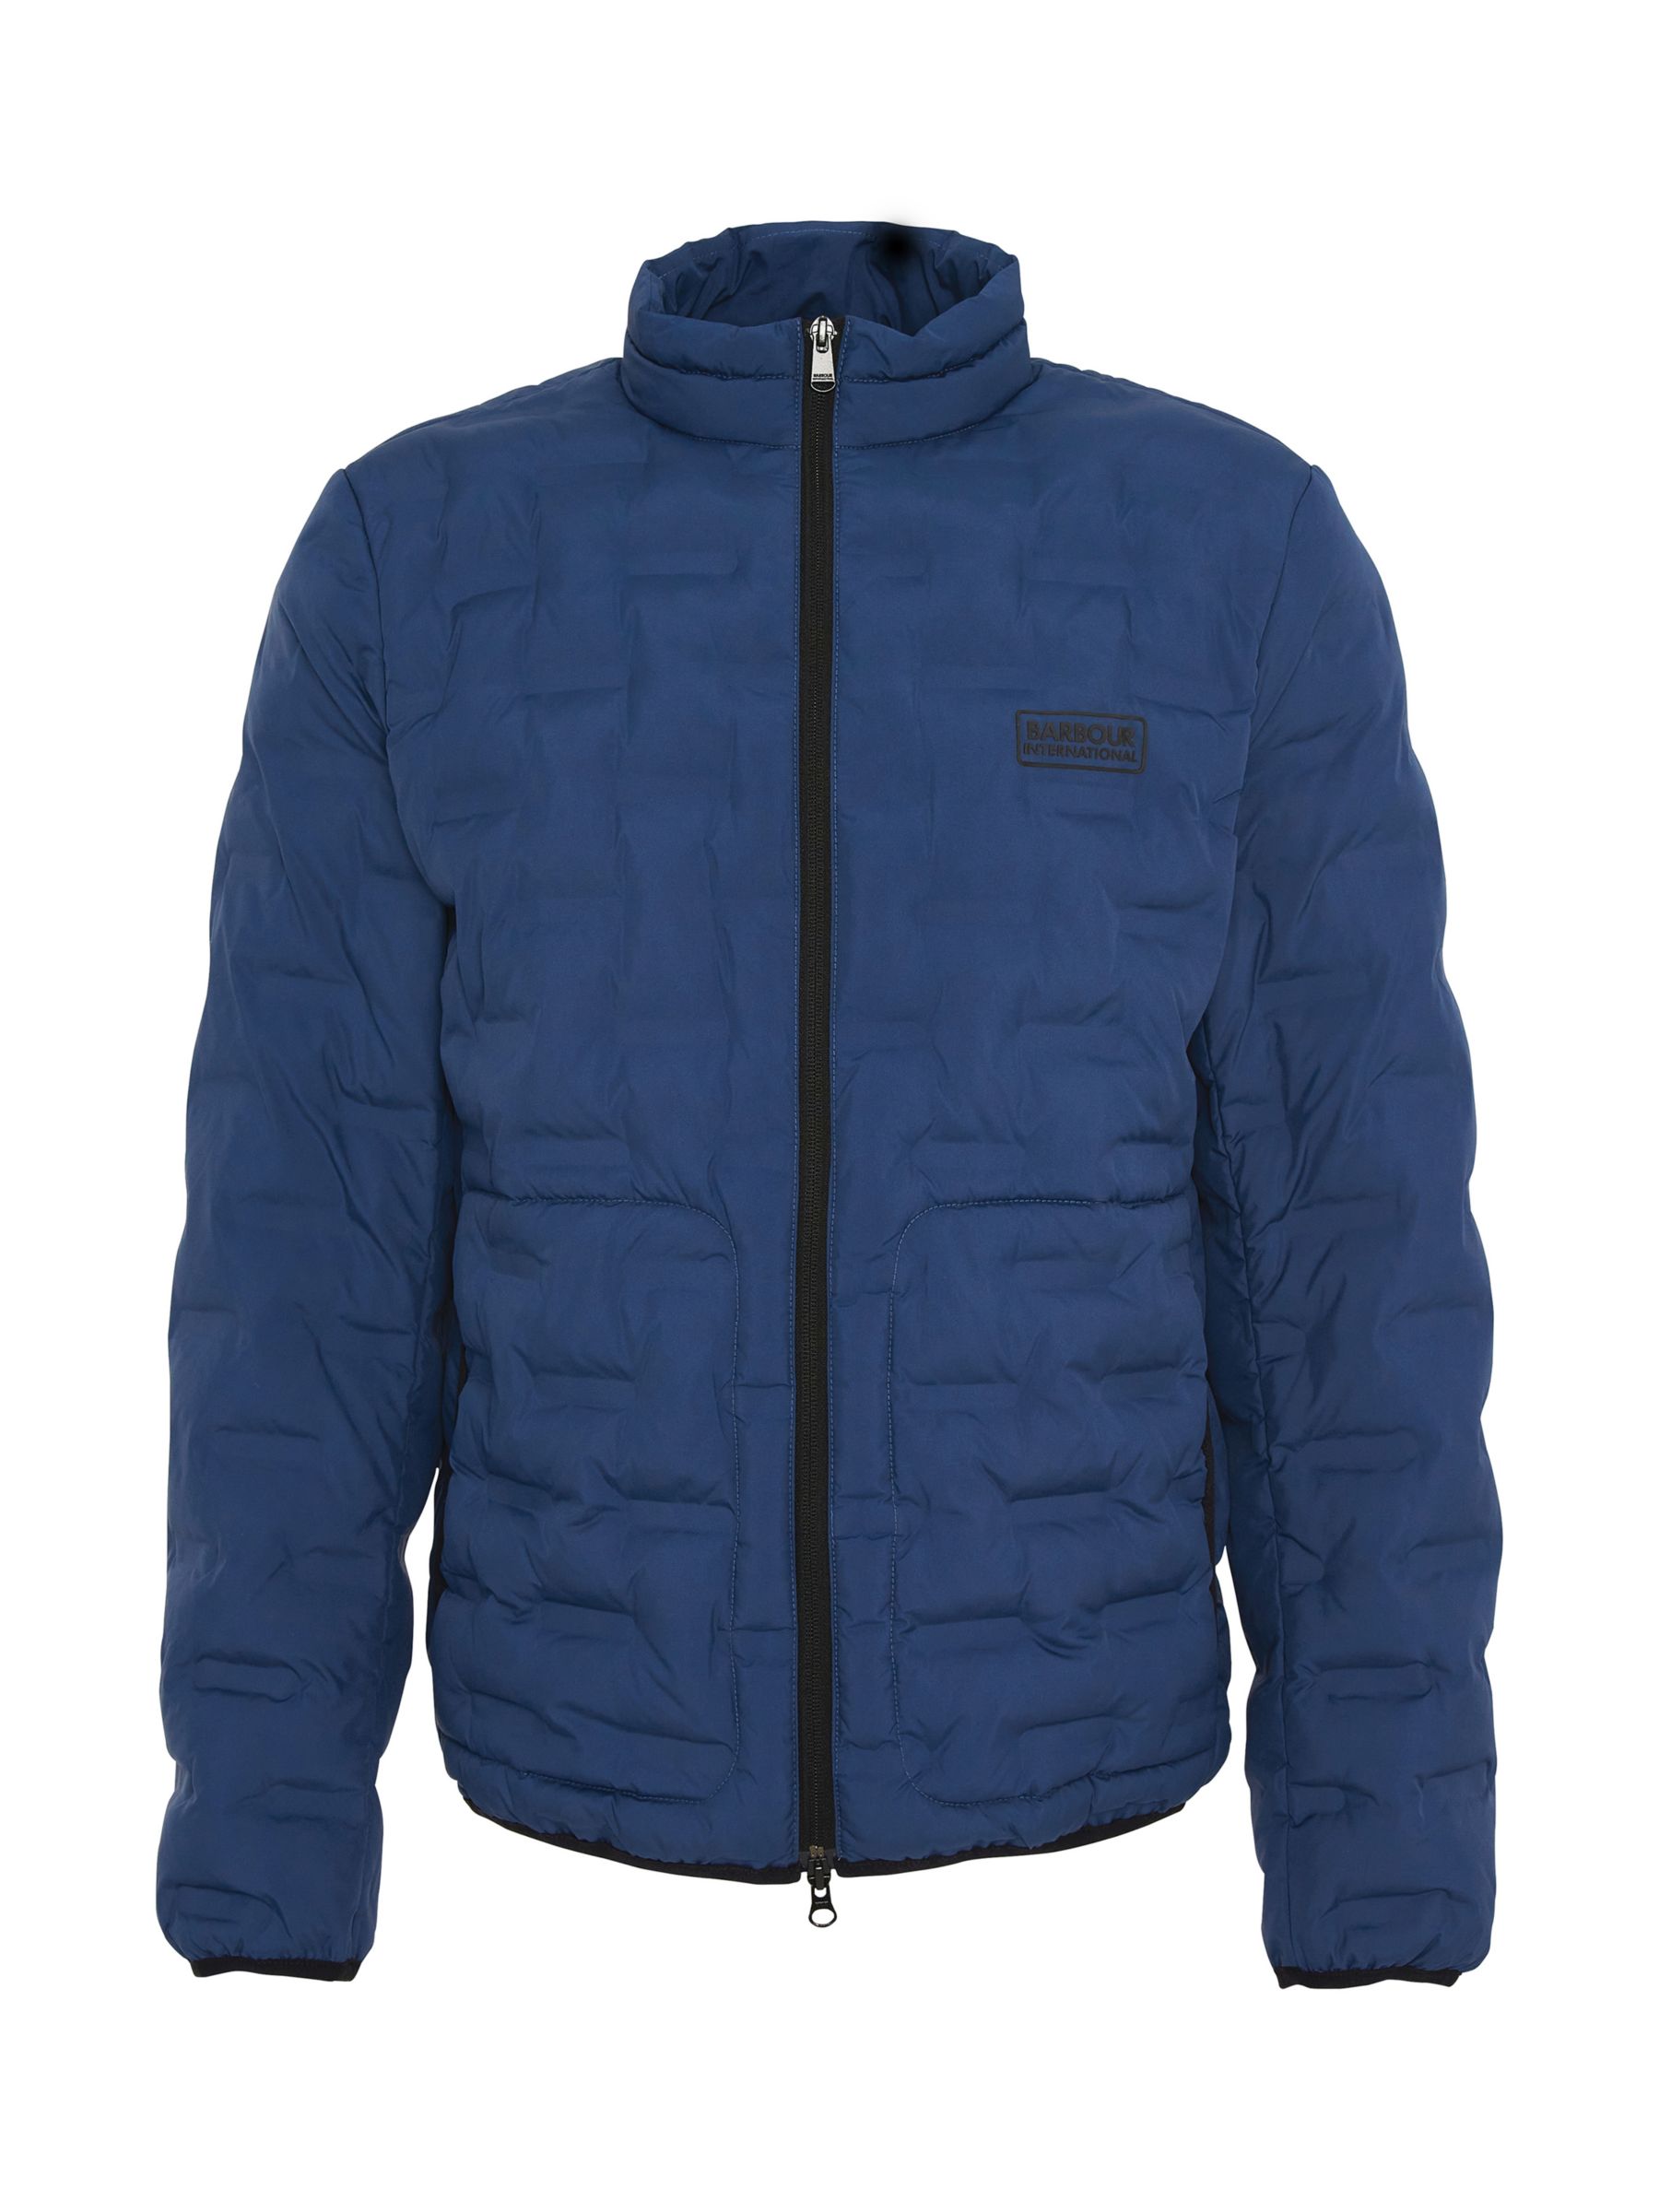 Barbour International Edge Long Sleeve Quilted Jacket, Blue, S